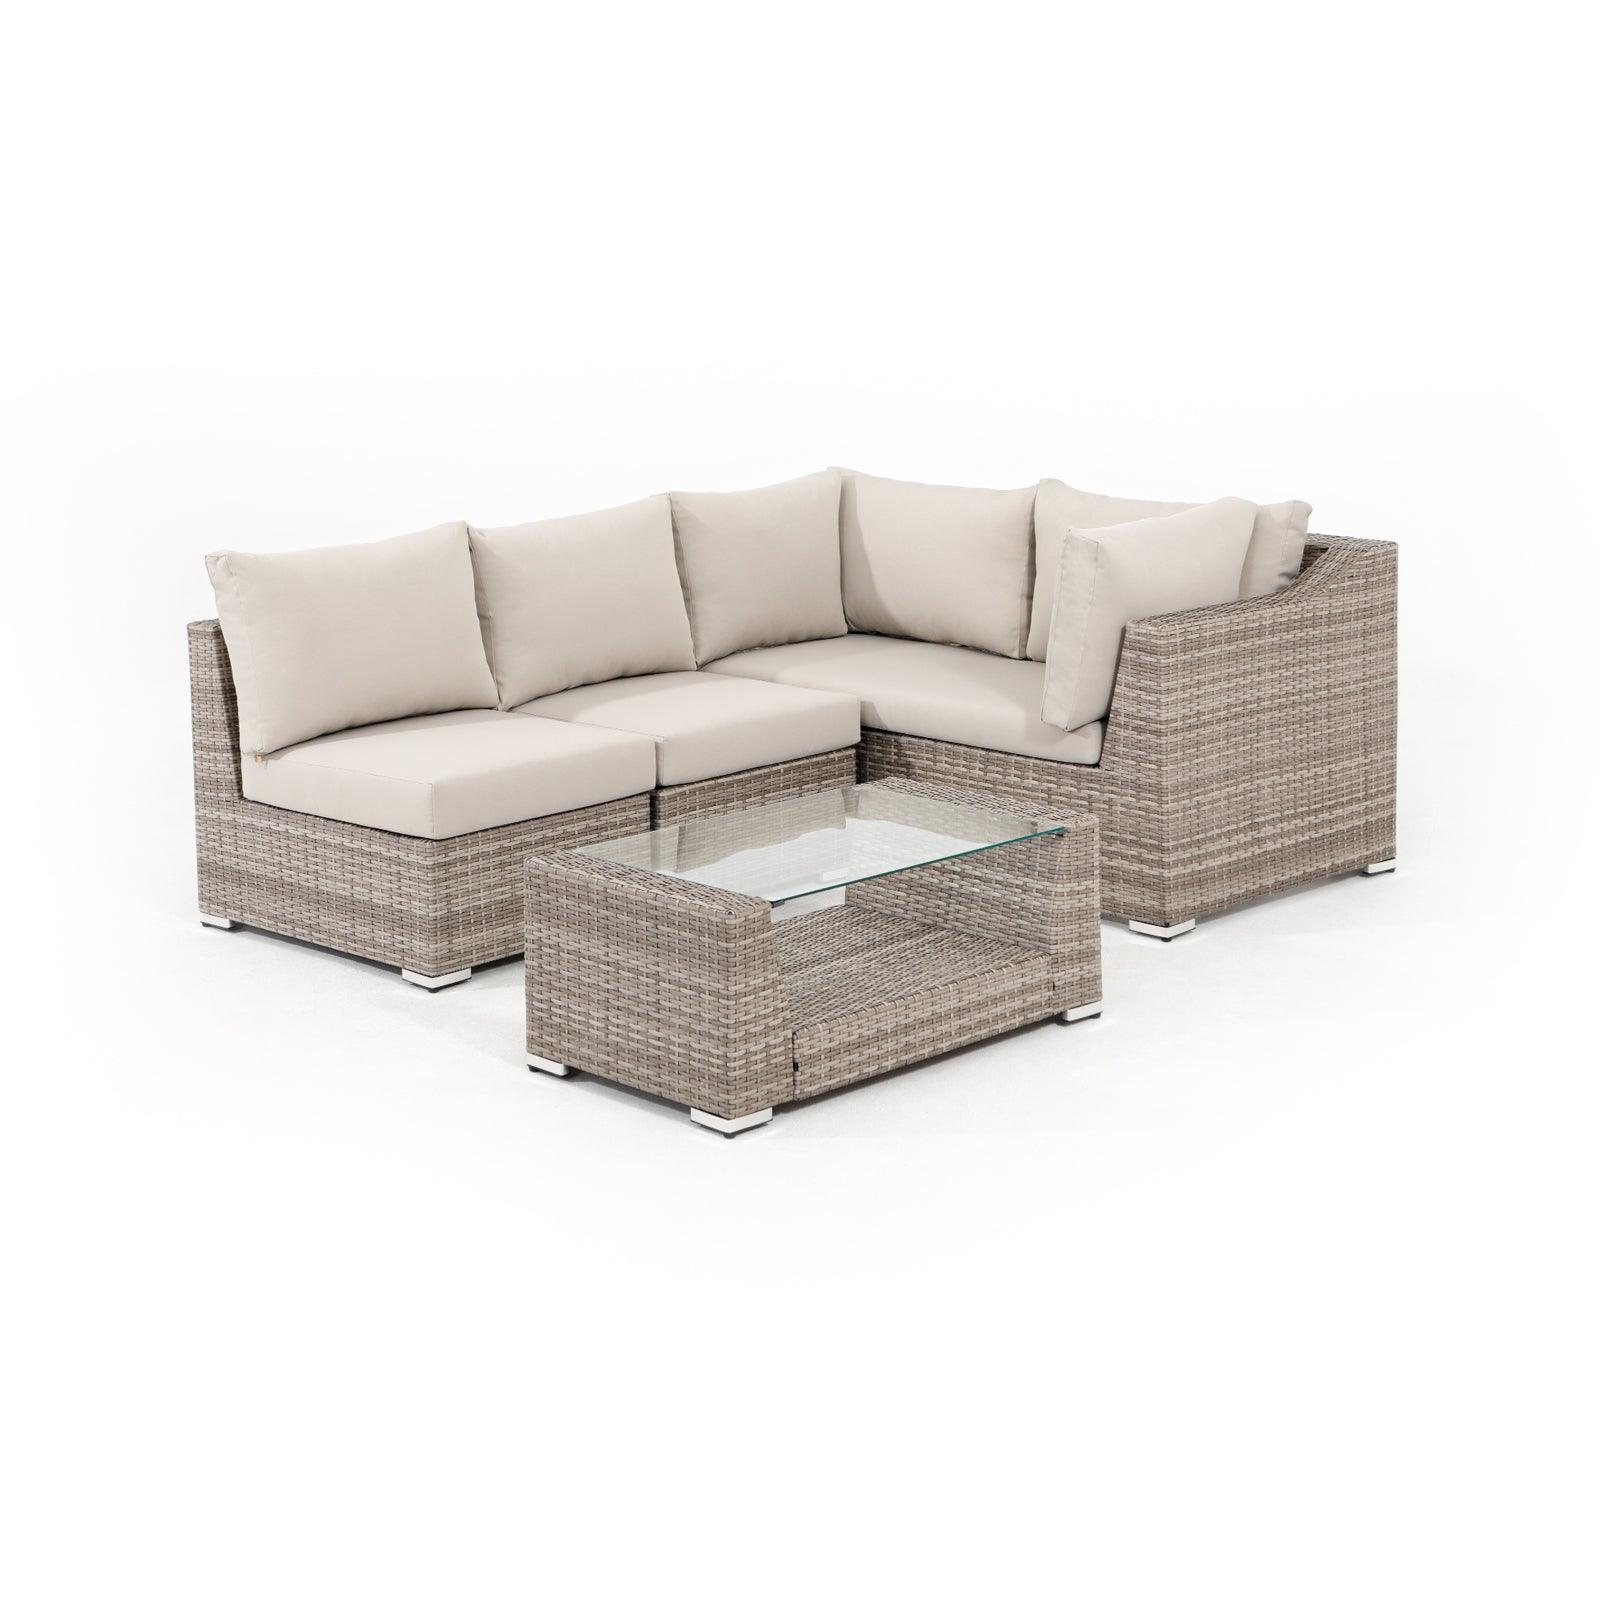 Elba Modern Wicker Outdoor Furniture, Grey Rattan Outdoor Sectional Sofa Set with grey cushions, 1 two-seater sofa, 2 single armless sofas, 1 rectangular coffee table with glass tabletop- Jardina Furniture